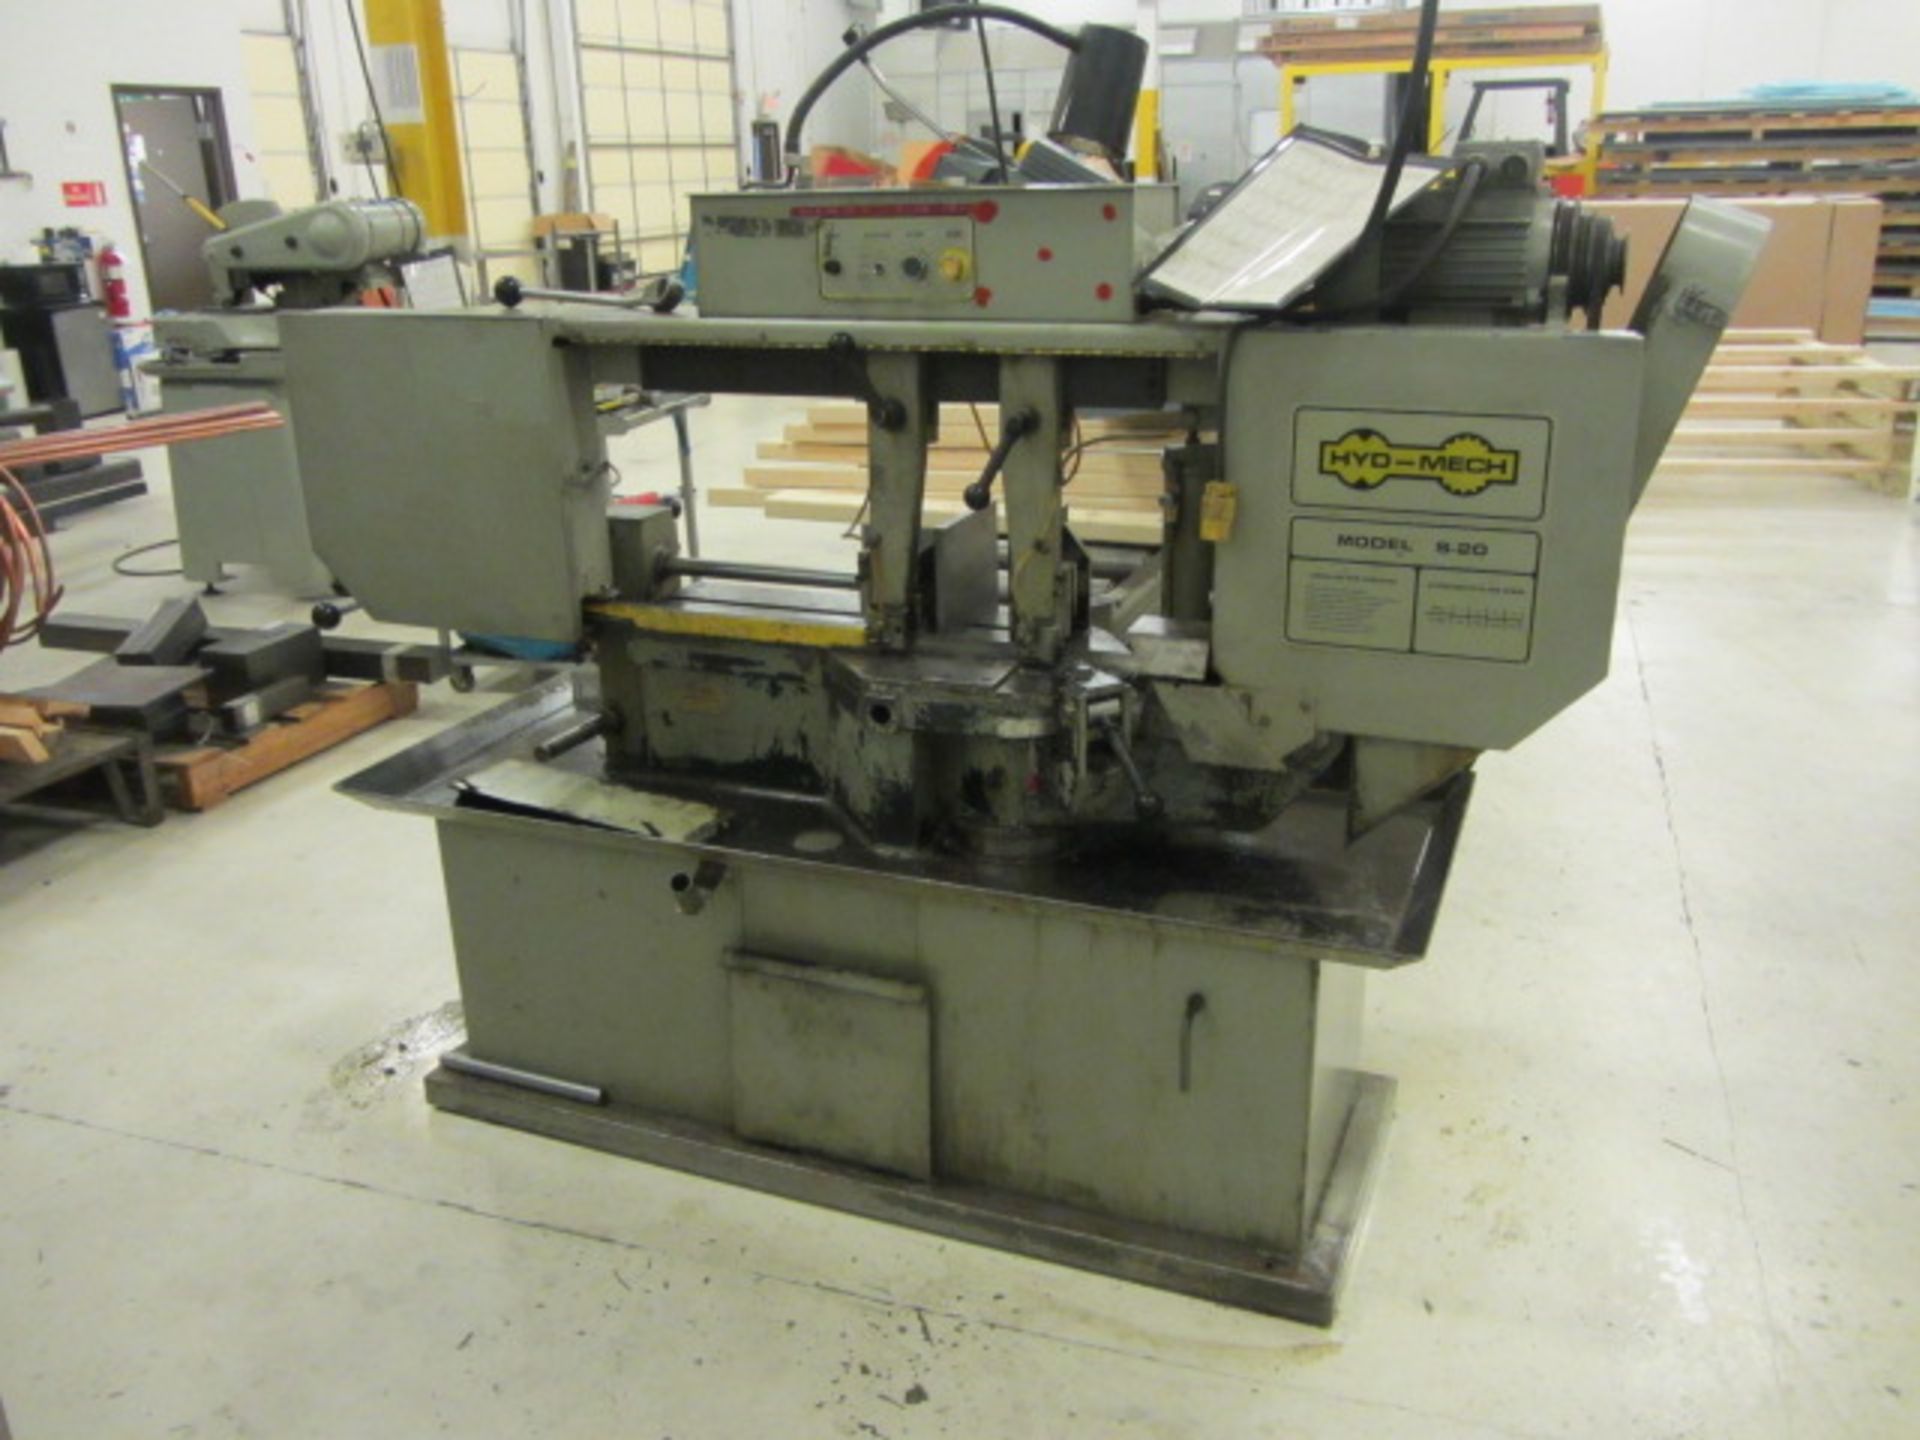 Hyd-Mech S-20 Mitre Cutting Horizontal Bandsaw with 13''H x 18''W Capacity, 13'' Rounds, Mitres to